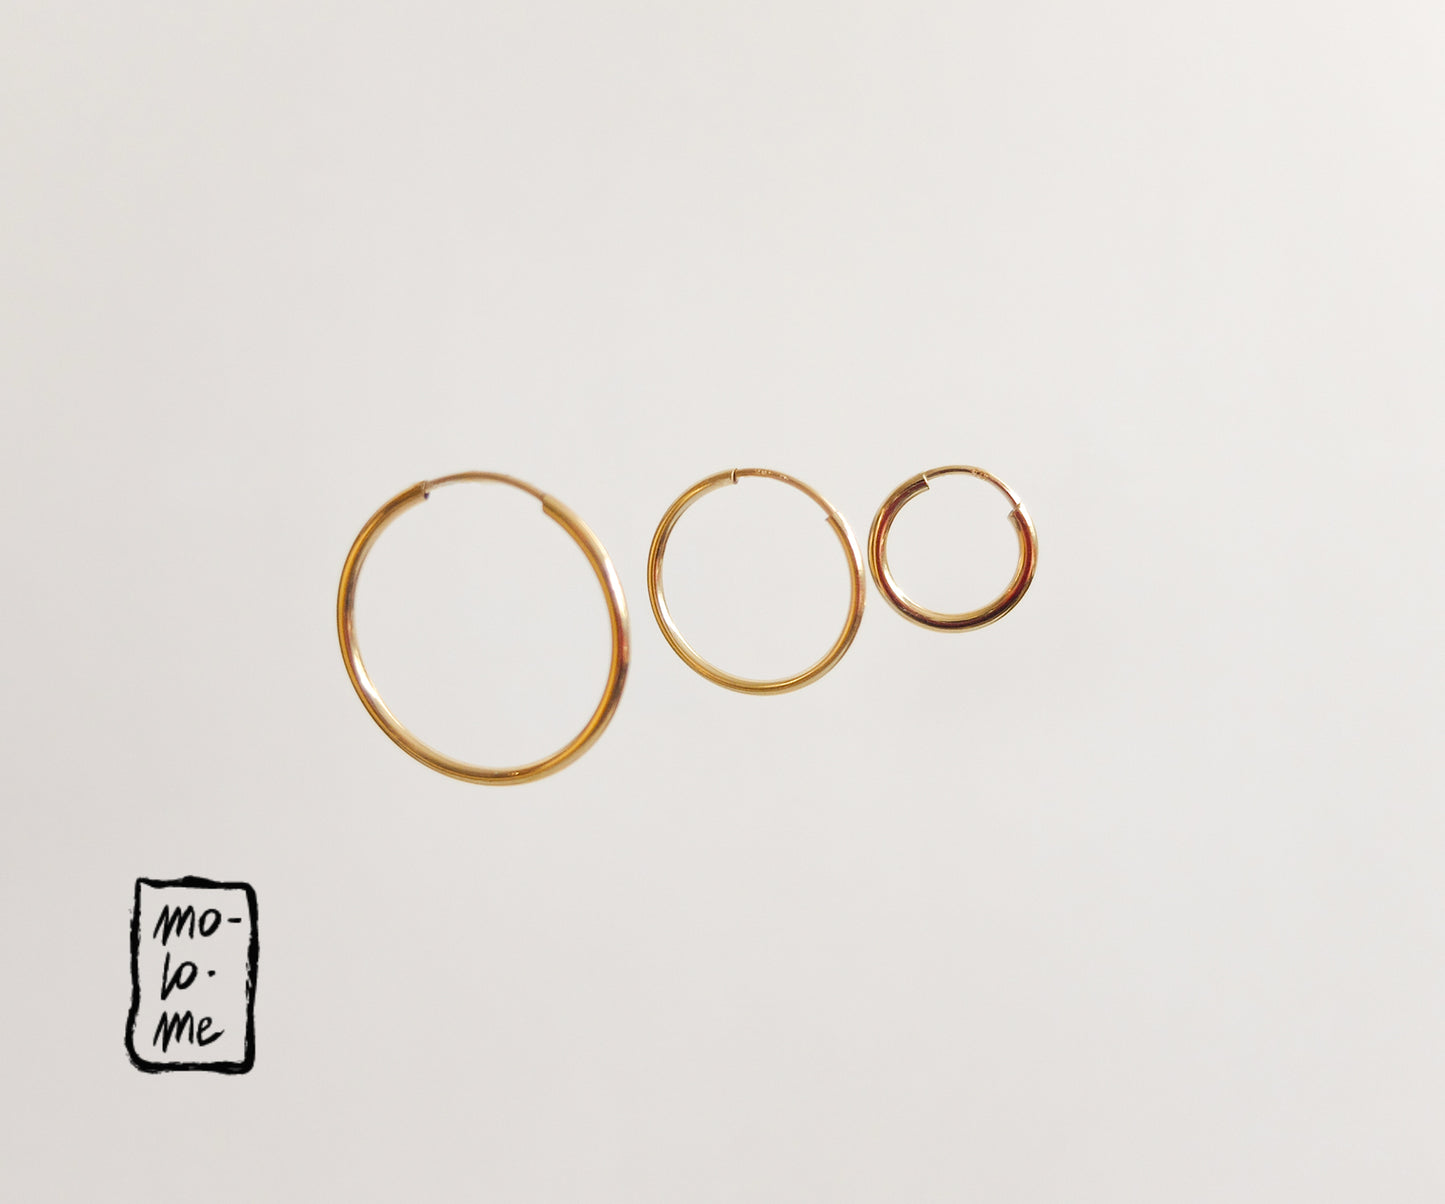 9 Carat Gold Simple Endless Hoops in Sizes: 3cm, 2cm and 13mm.